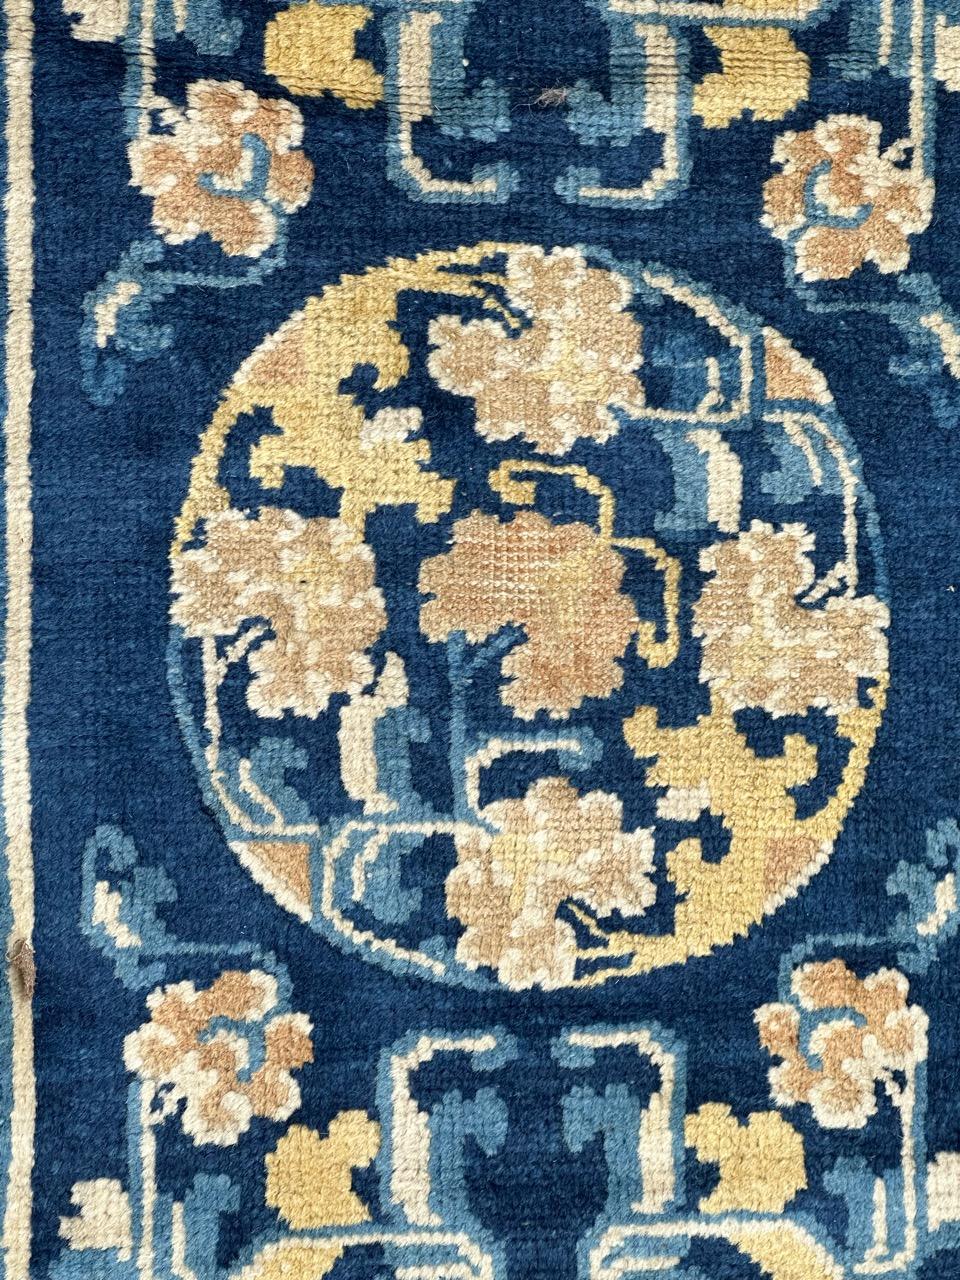 Very nice antique and rare Chinese rug from Ningxia with nice Chinese design and symbols on design, and nice natural colours with a navy blue field and yellow, gold, orange , white and sky blue on design, a beautiful border with stylized designs